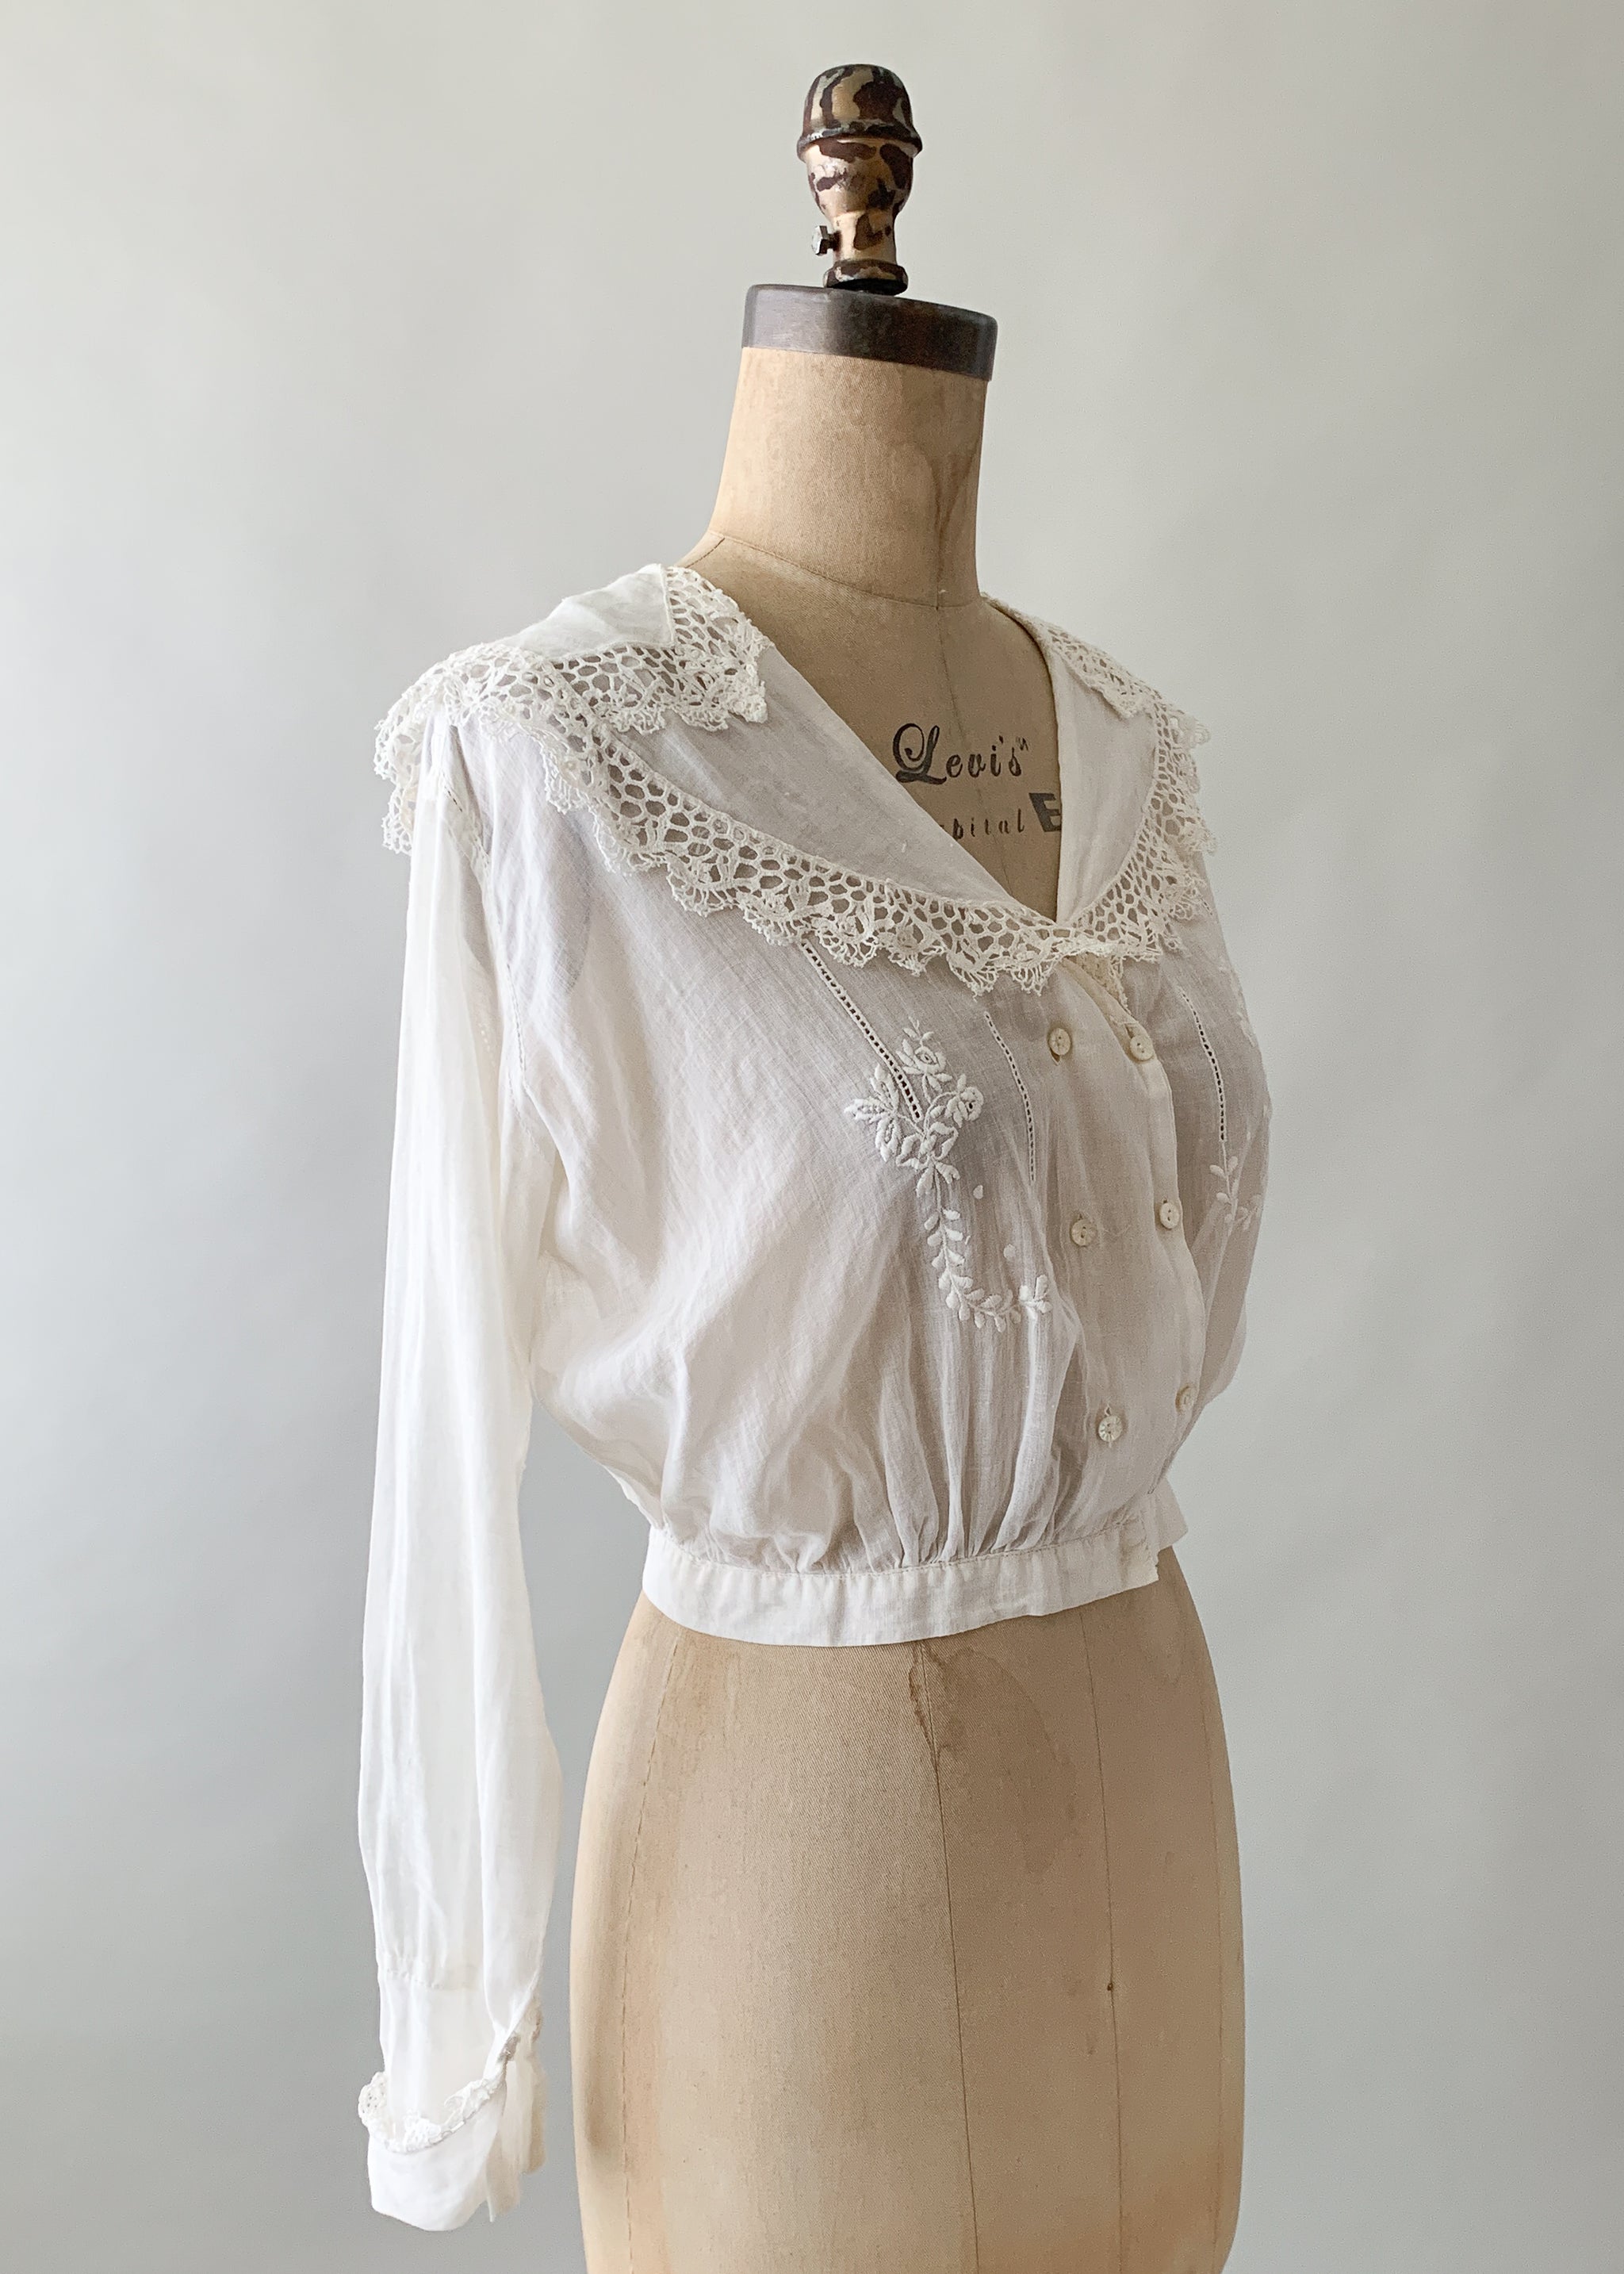 Antique Edwardian Embroidered Cotton Blouse - Raleigh Vintage